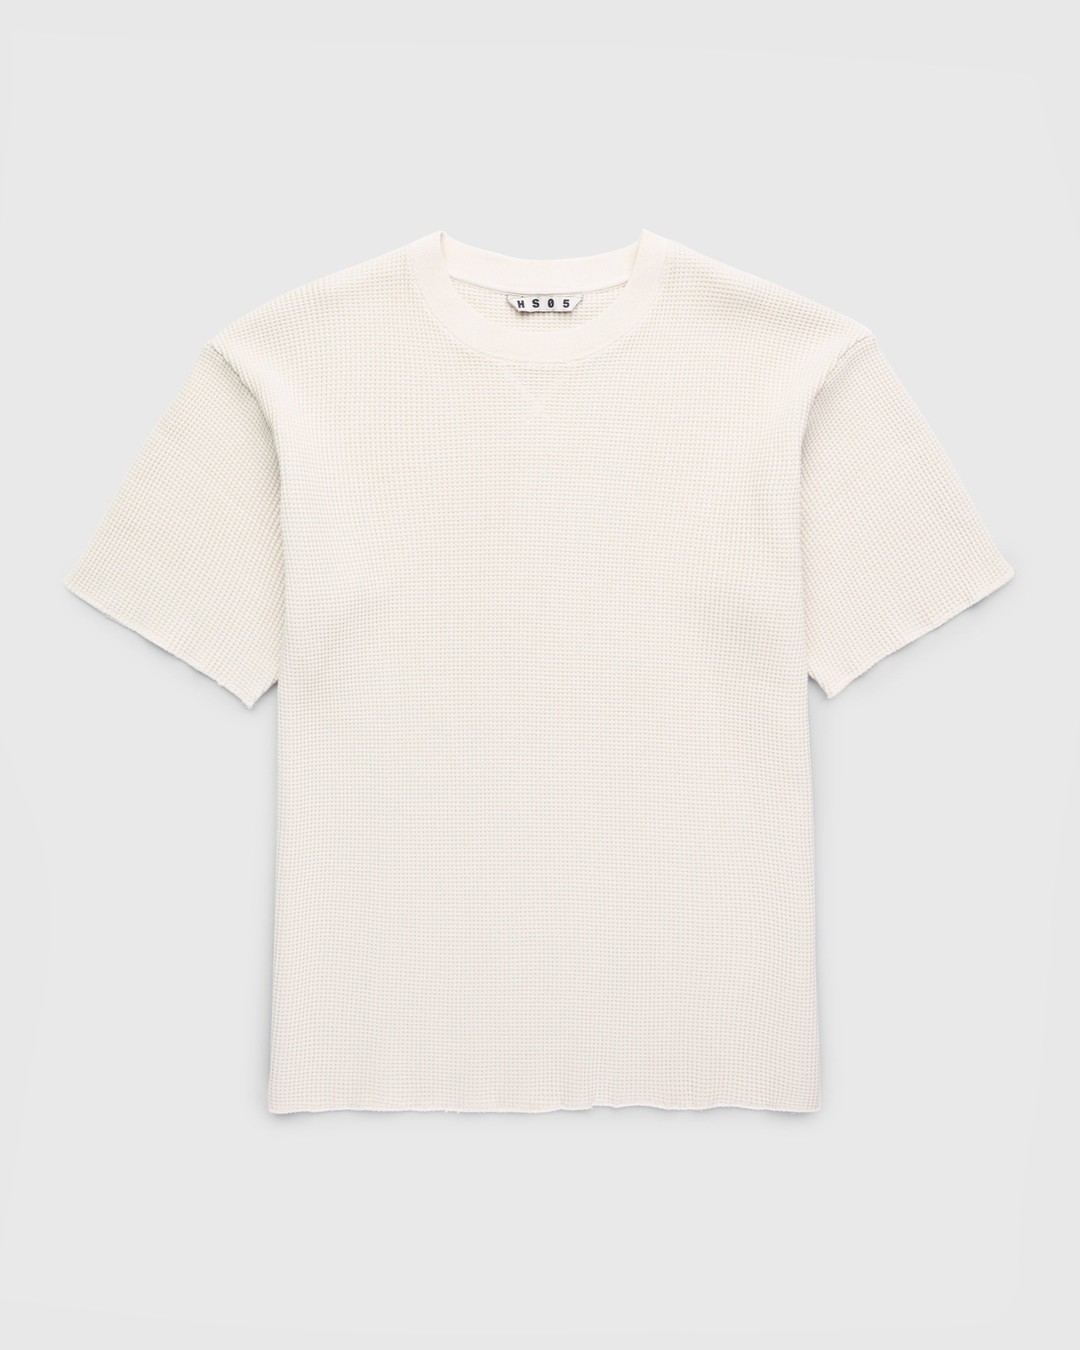 Highsnobiety HS05 – Thermal Short Sleeve Natural - T-shirts - Beige - Image 1